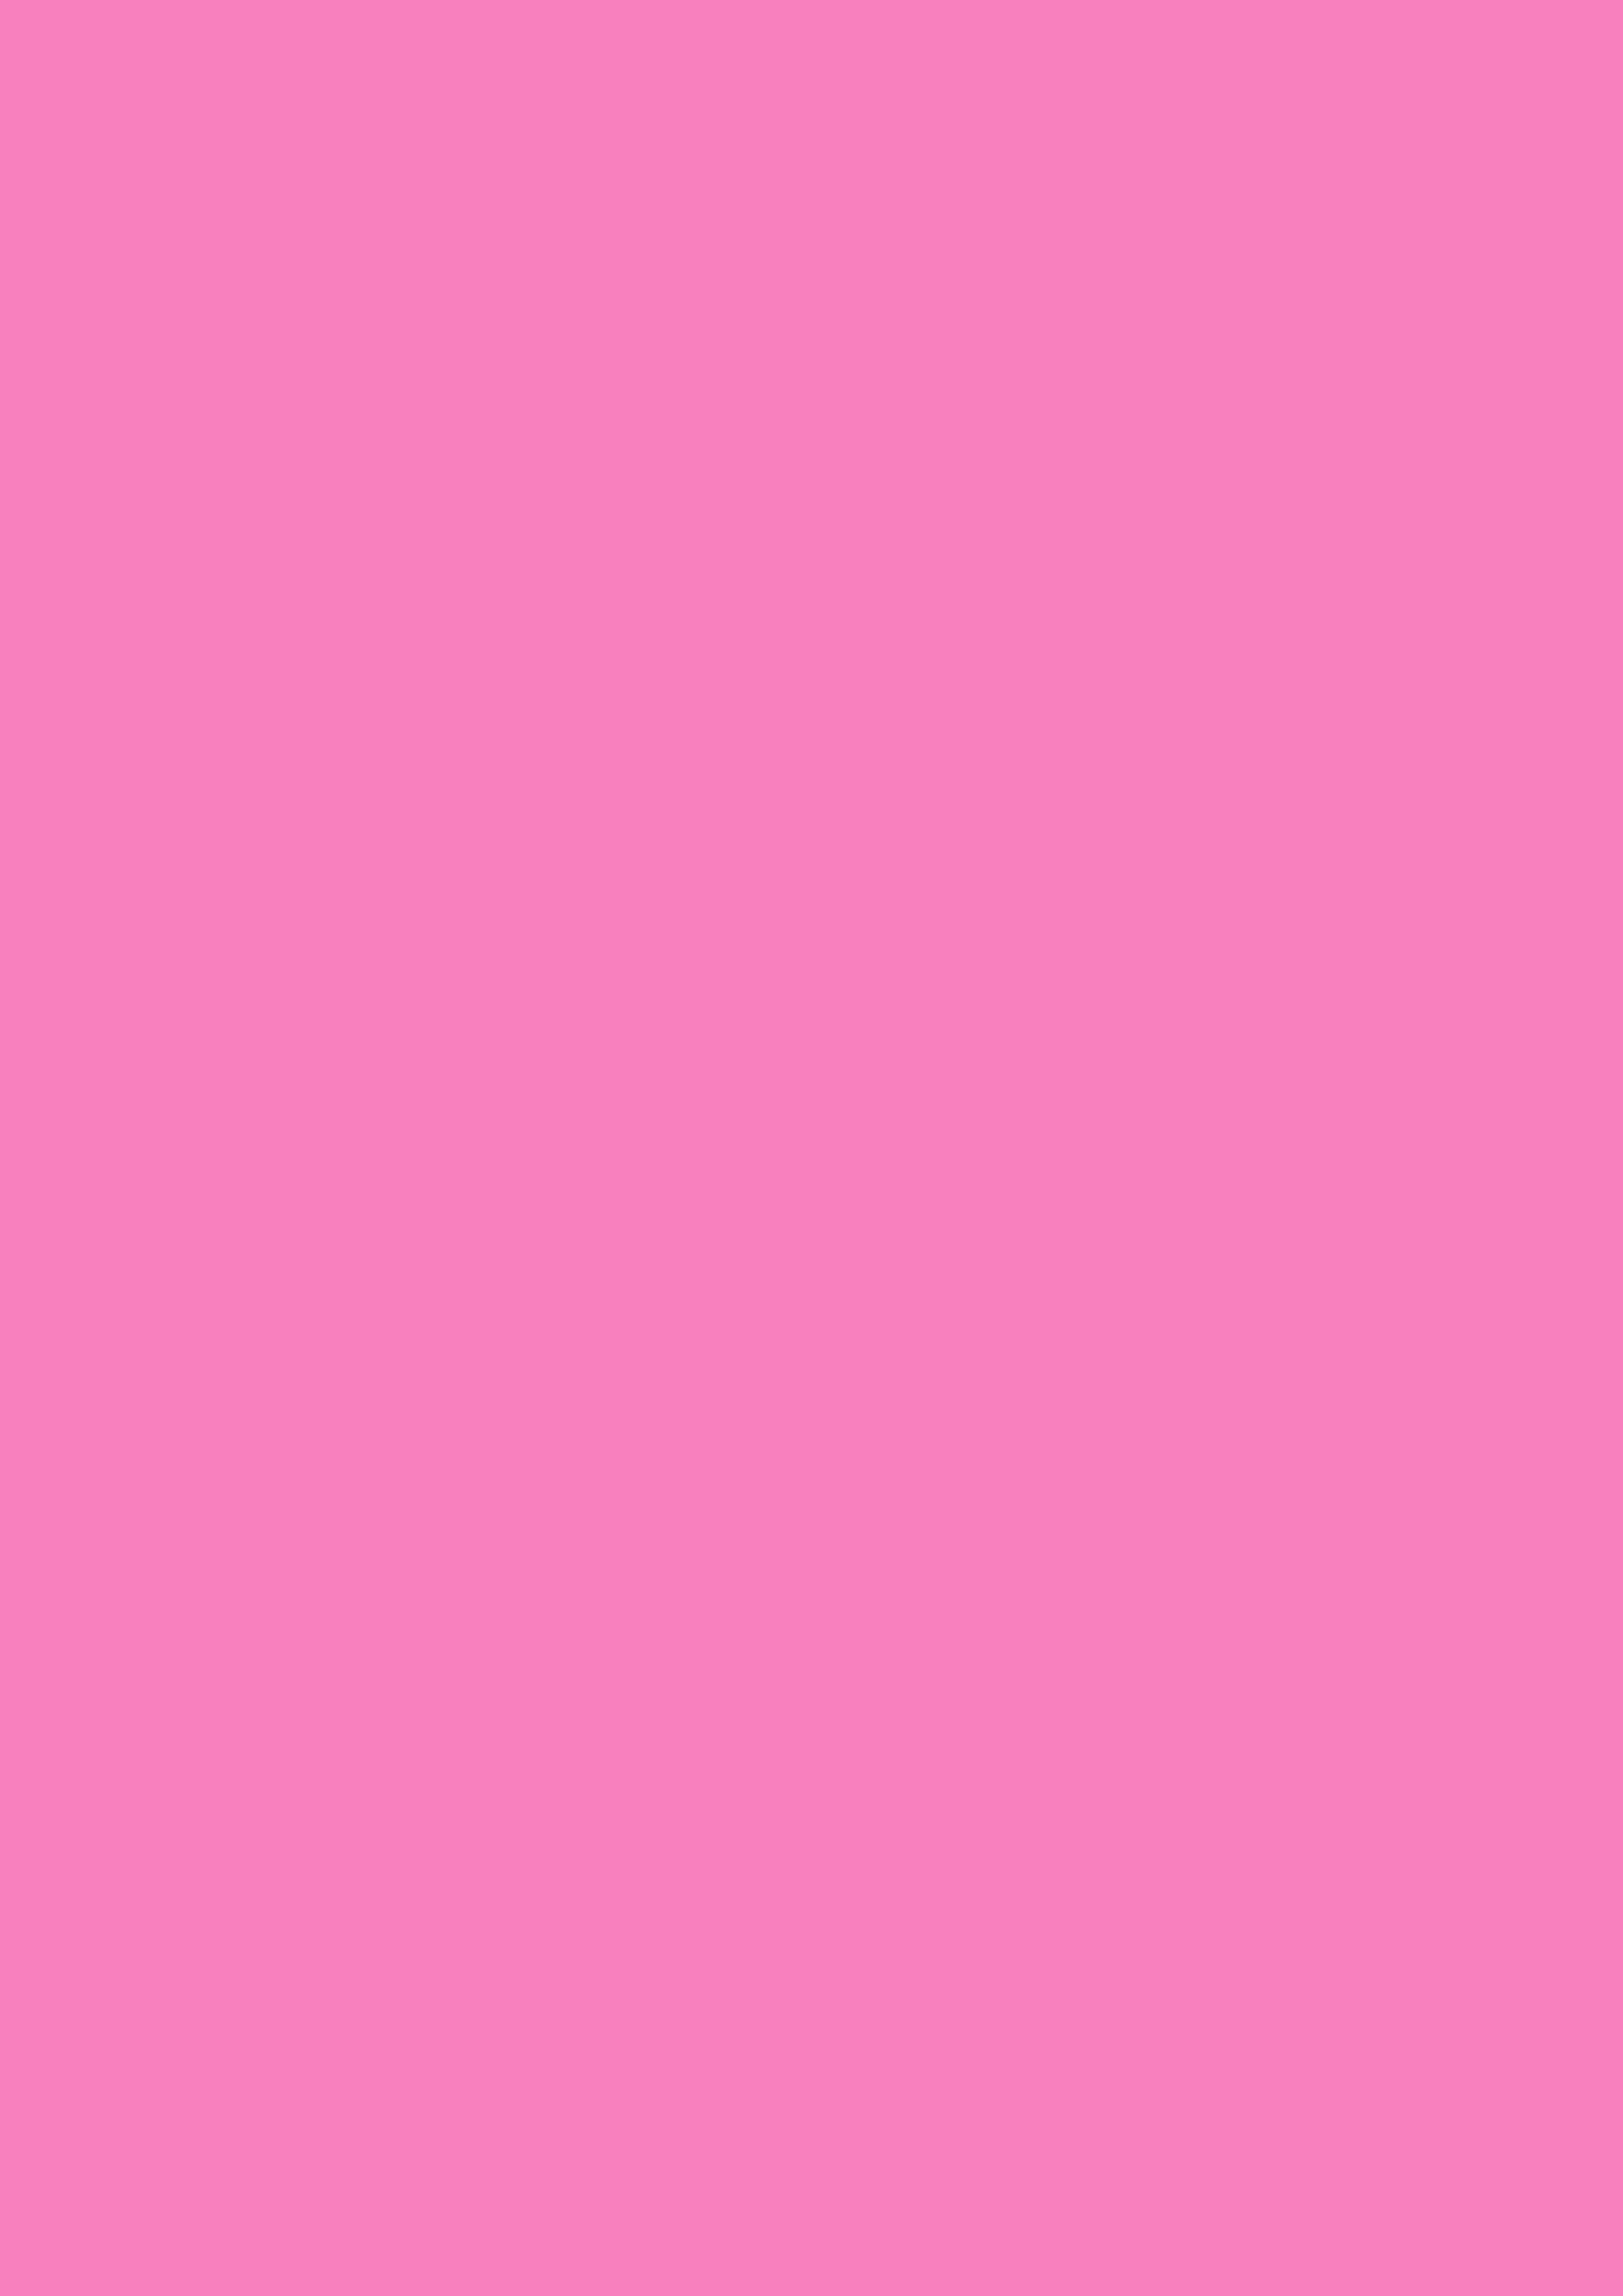 2480x3508 Persian Pink Solid Color Background